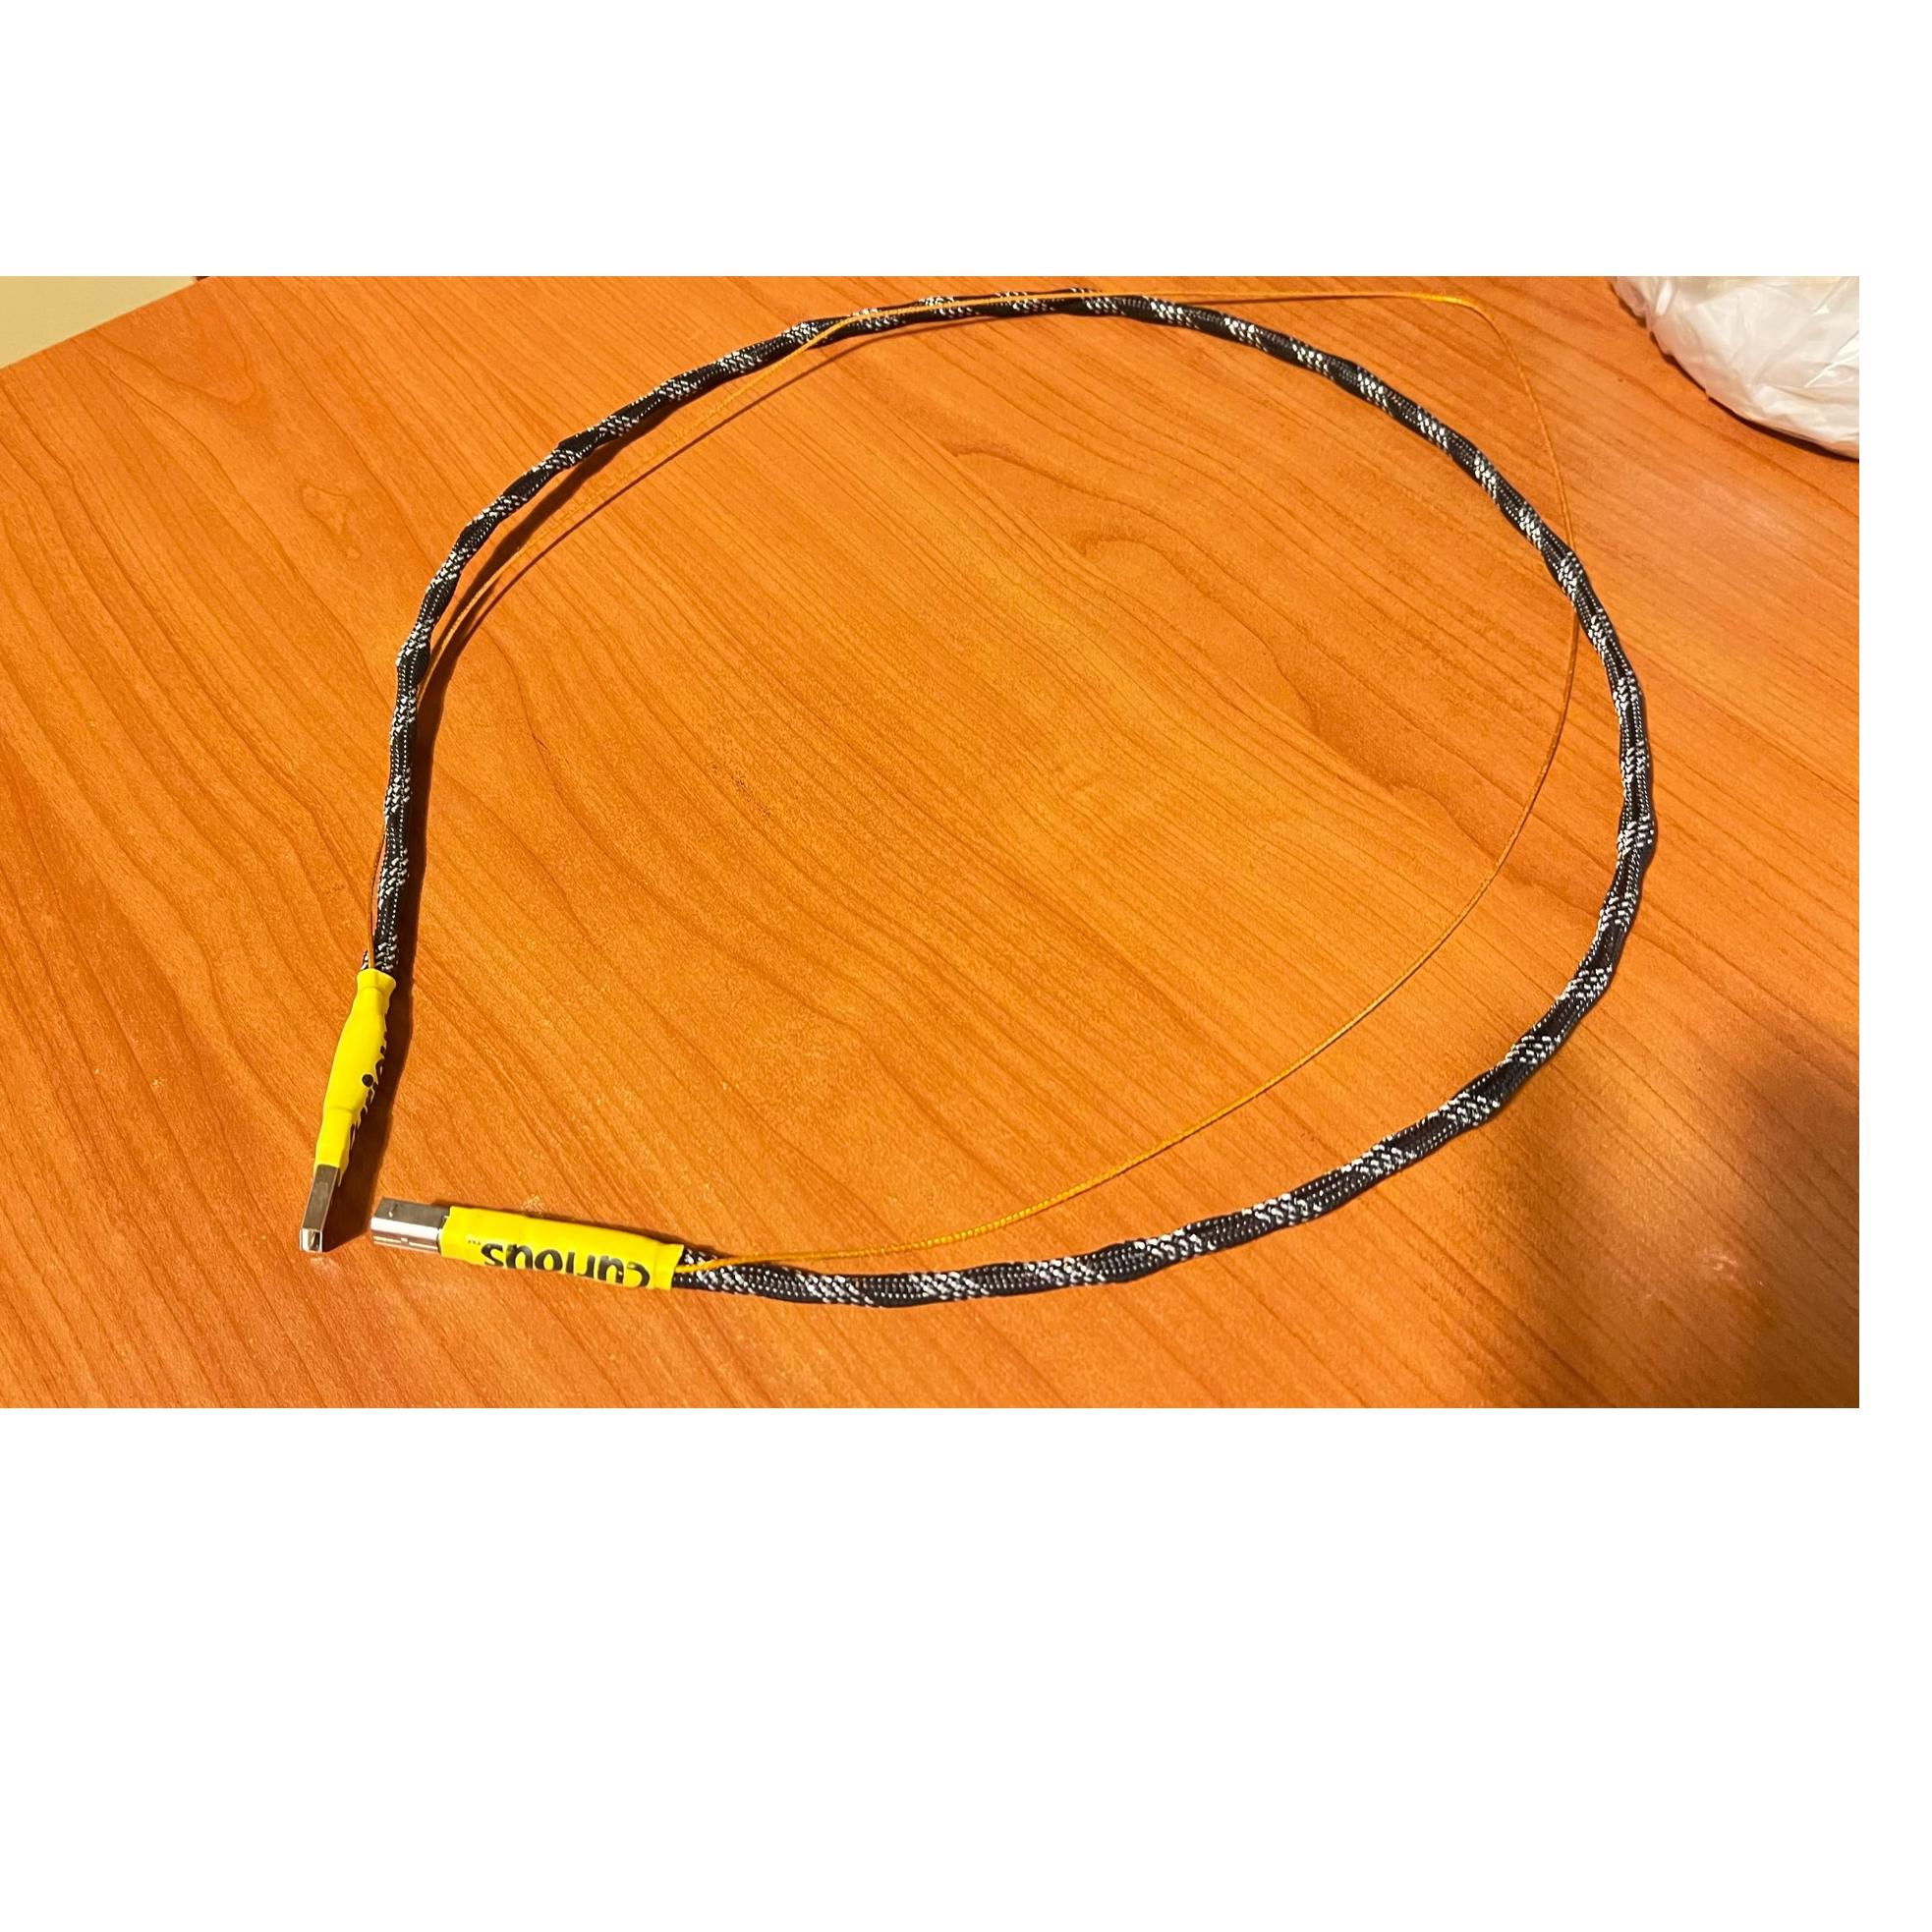 Curious usb cable 1 mt